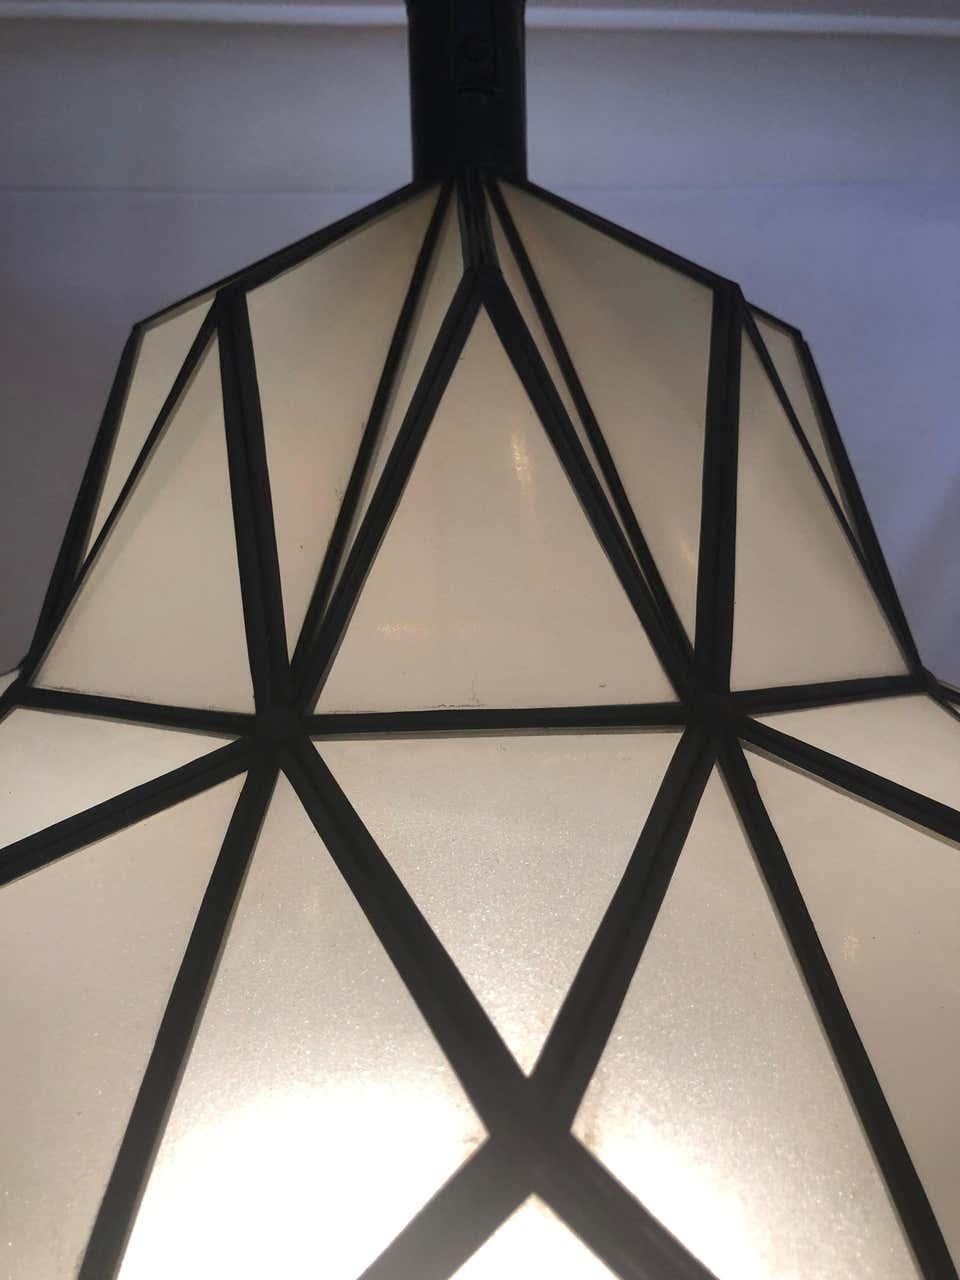 A stunning Art Deco style dome form milk glass white chandelier or lantern. Having individual panes, possessing an open door pane leading to a double recently wired setting housing one sixty watts bulbs. These fine custom lantern are sure to light